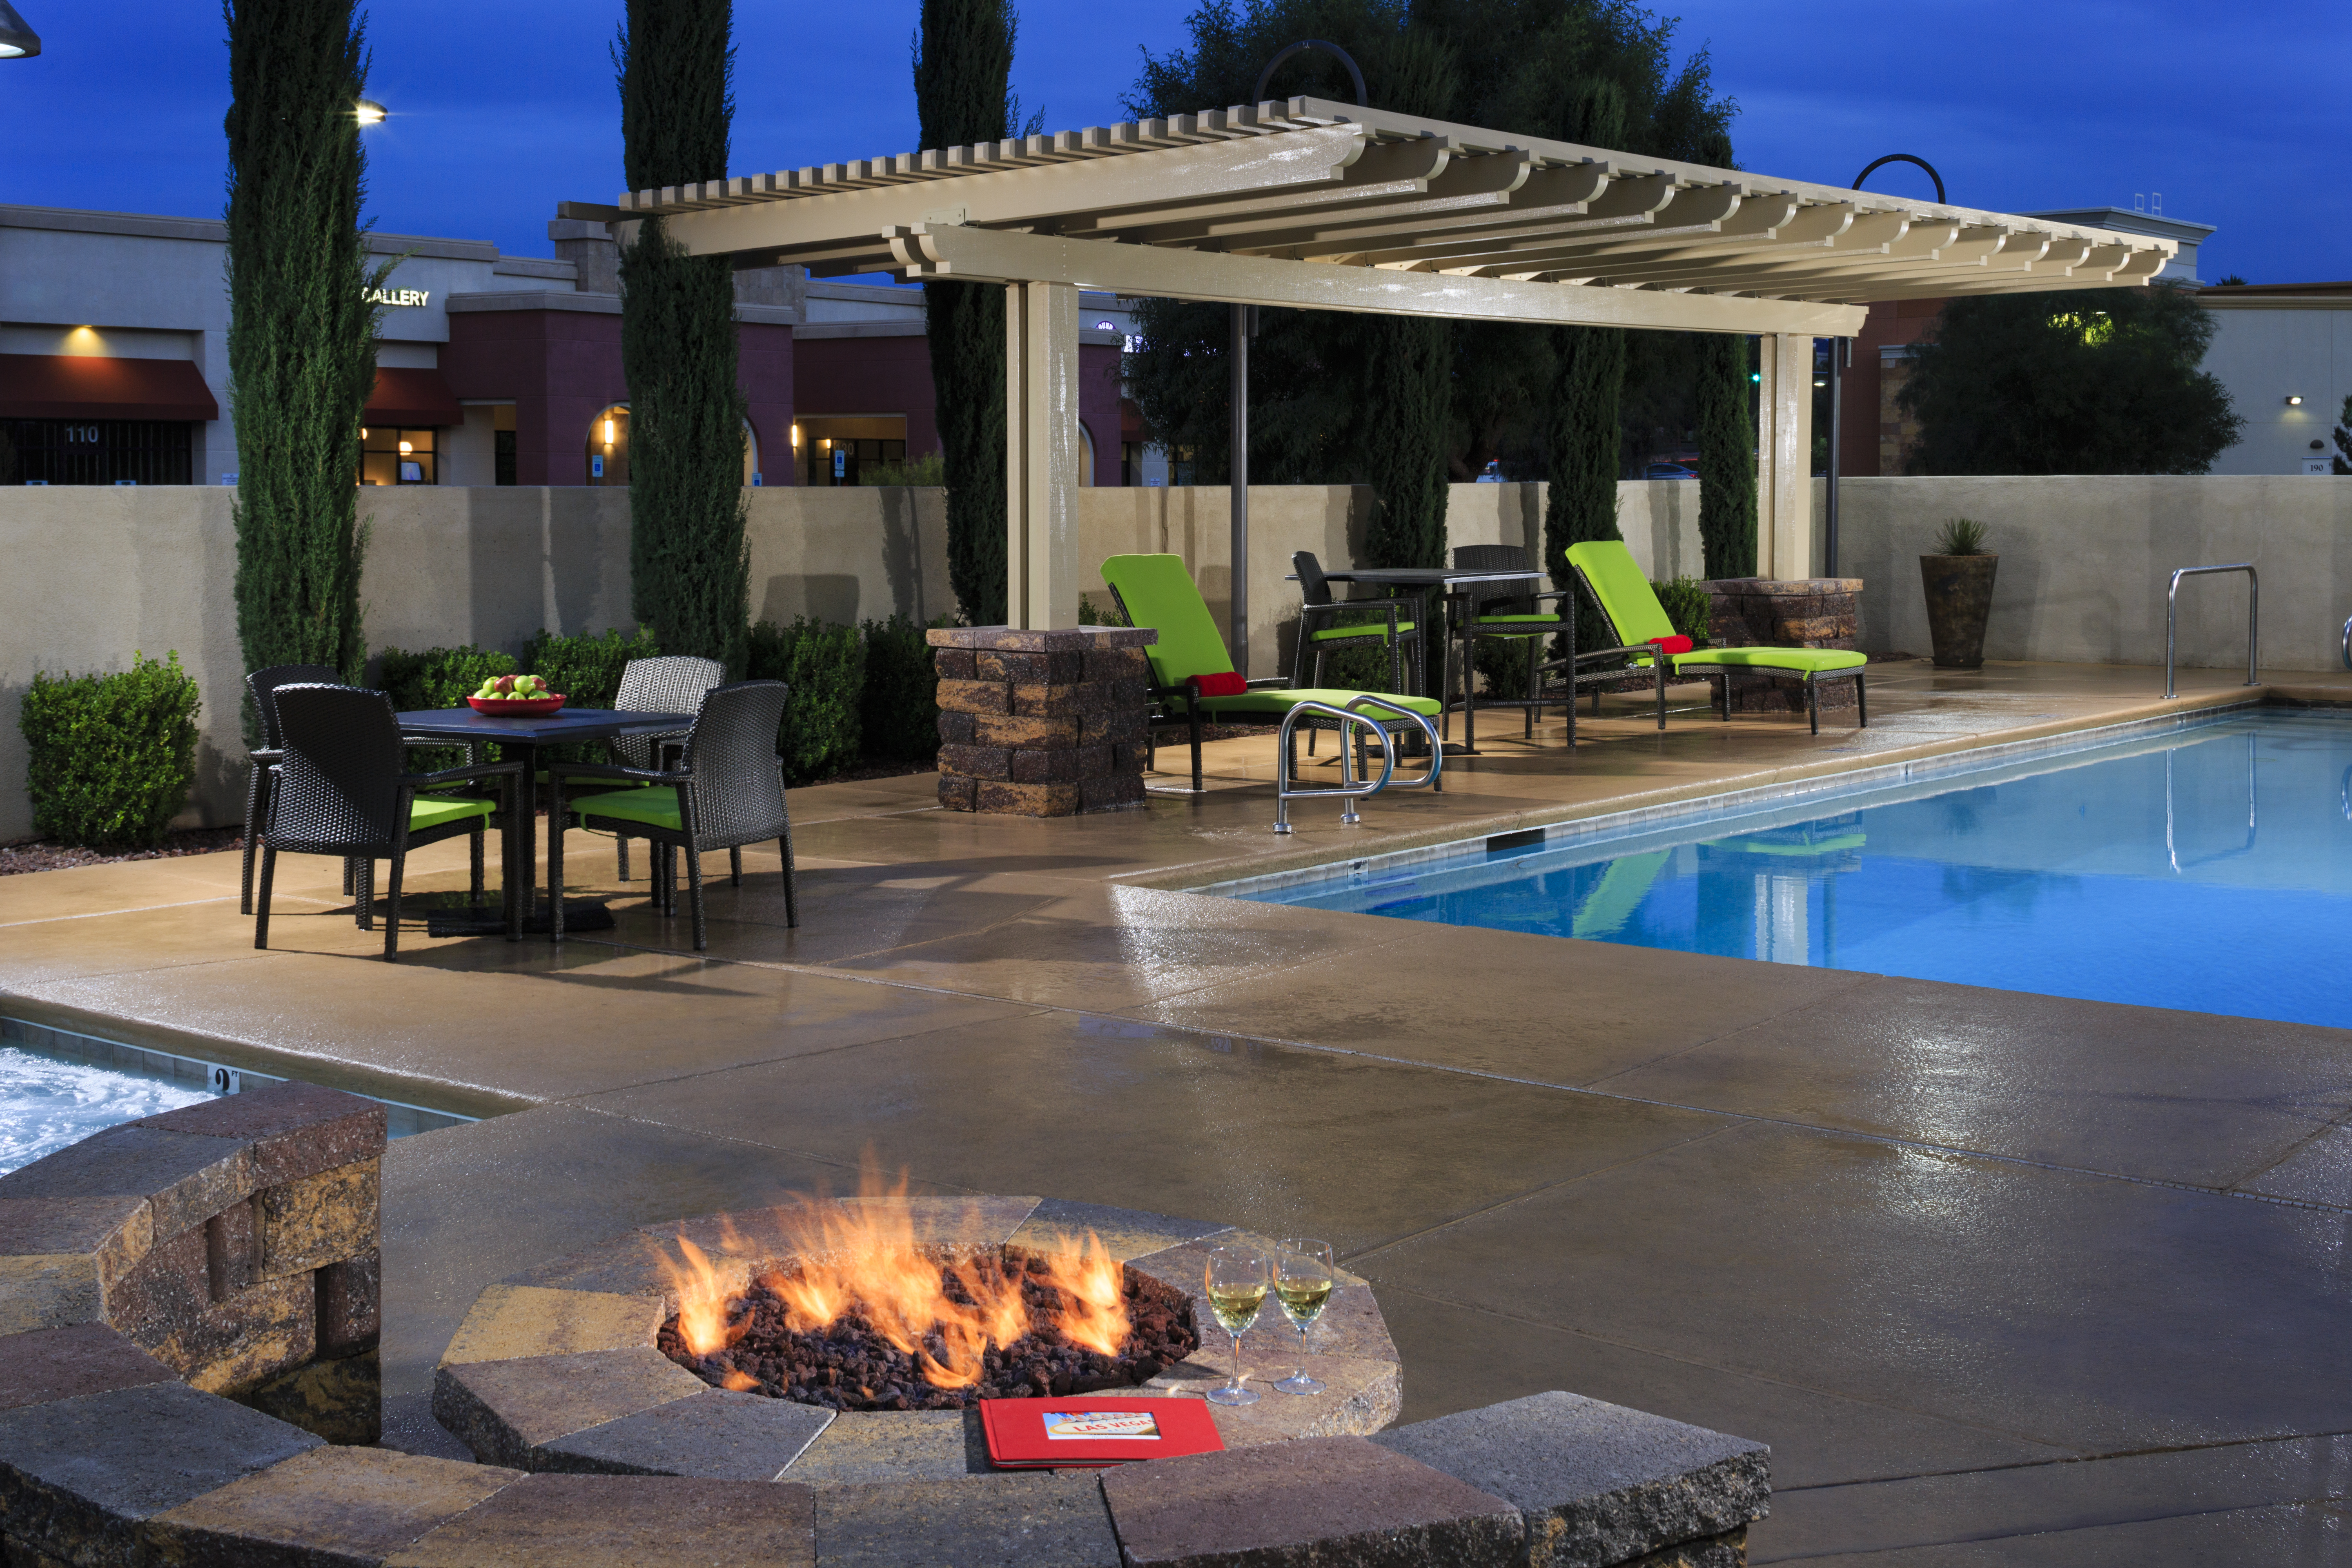 Firepit and Pool Area